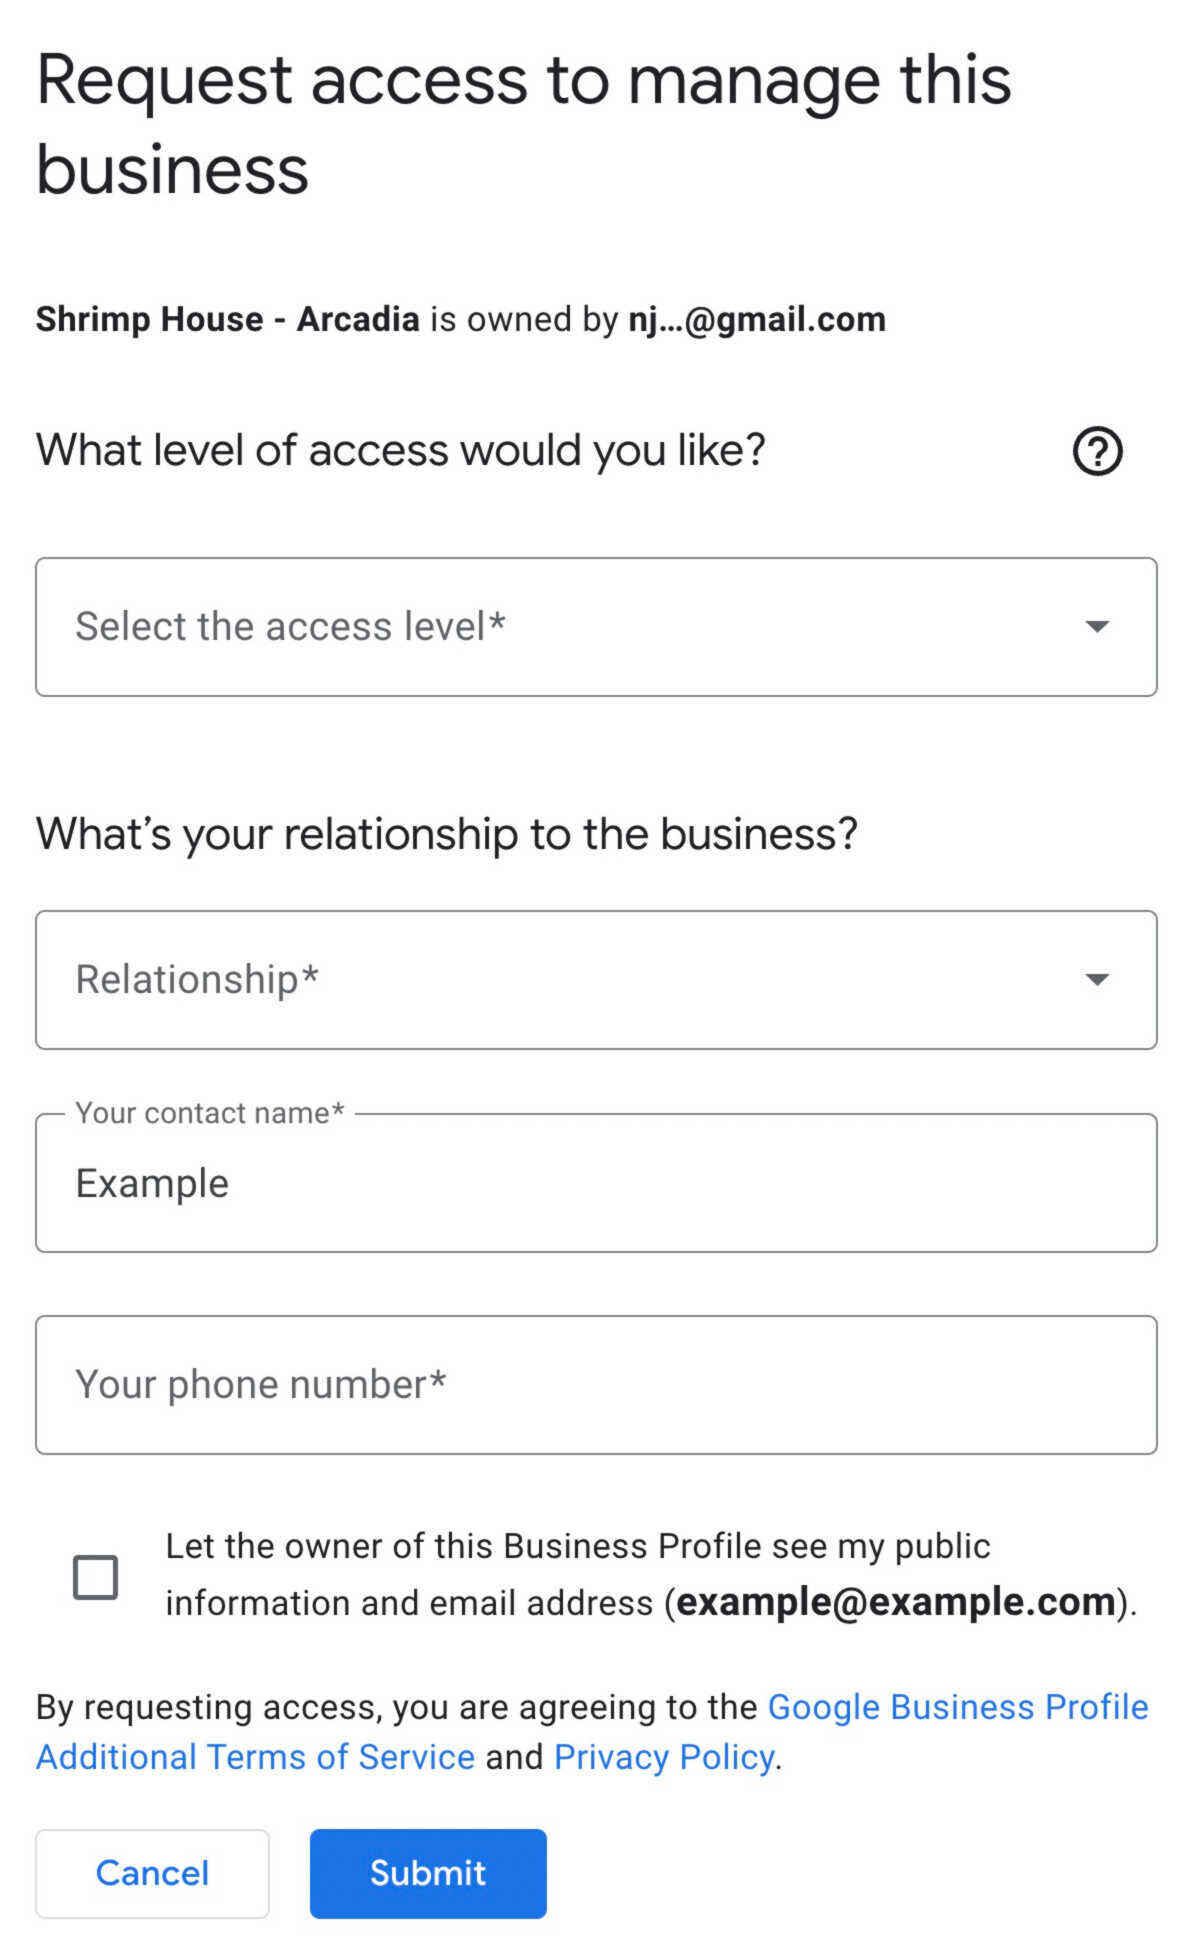 Request access to a business